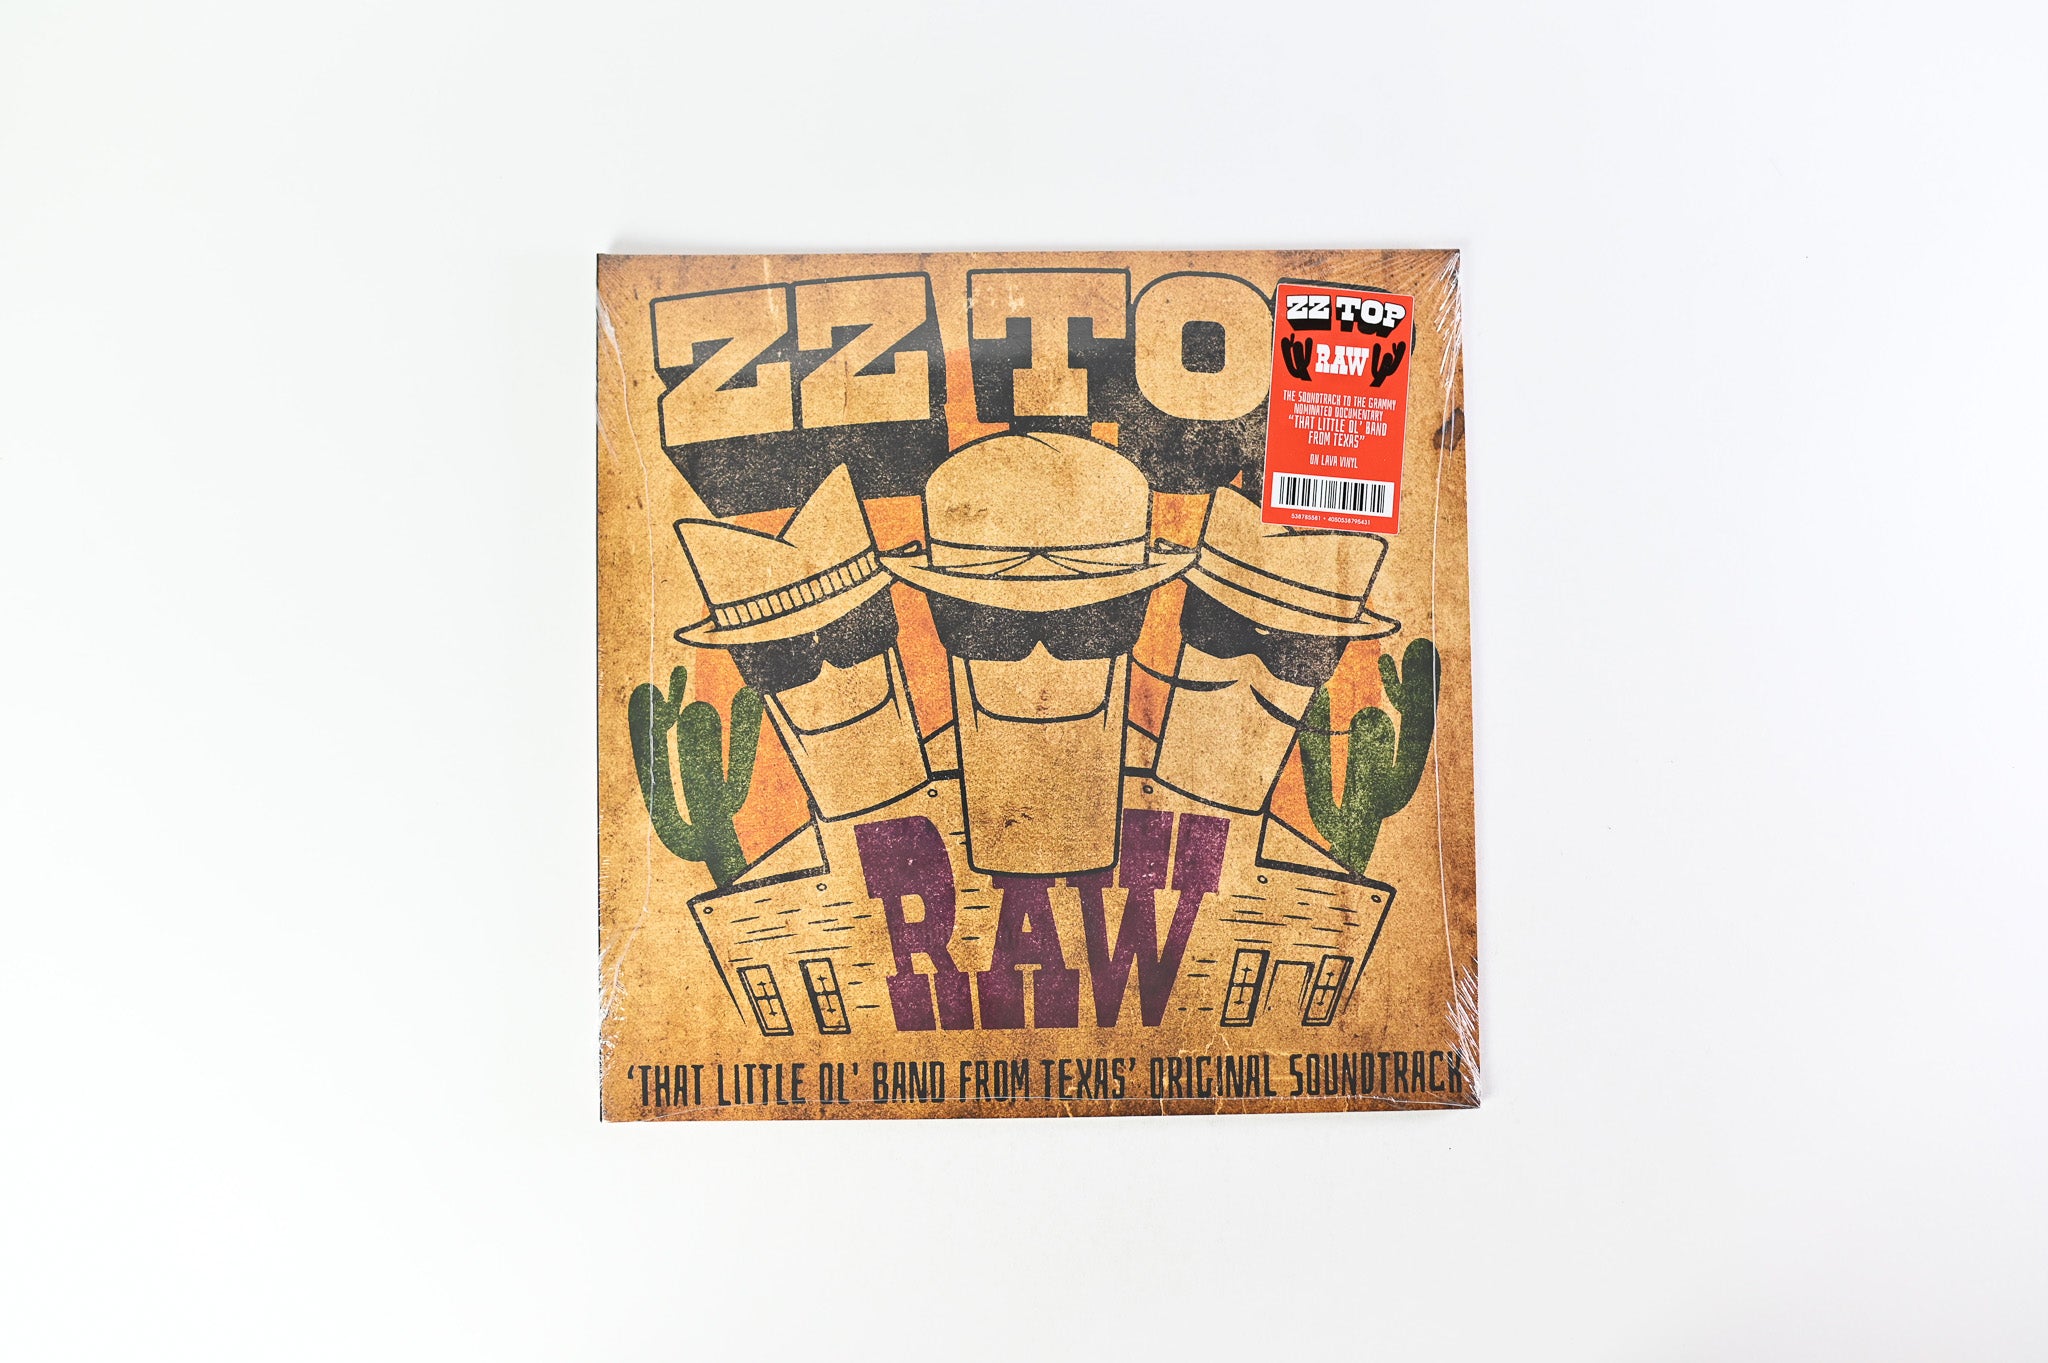 ZZ Top - Raw ('That Little Ol' Band From Texas' Original Soundtrack) on BMG Ltd Lava Vinyl Webstore Exclusive Sealed